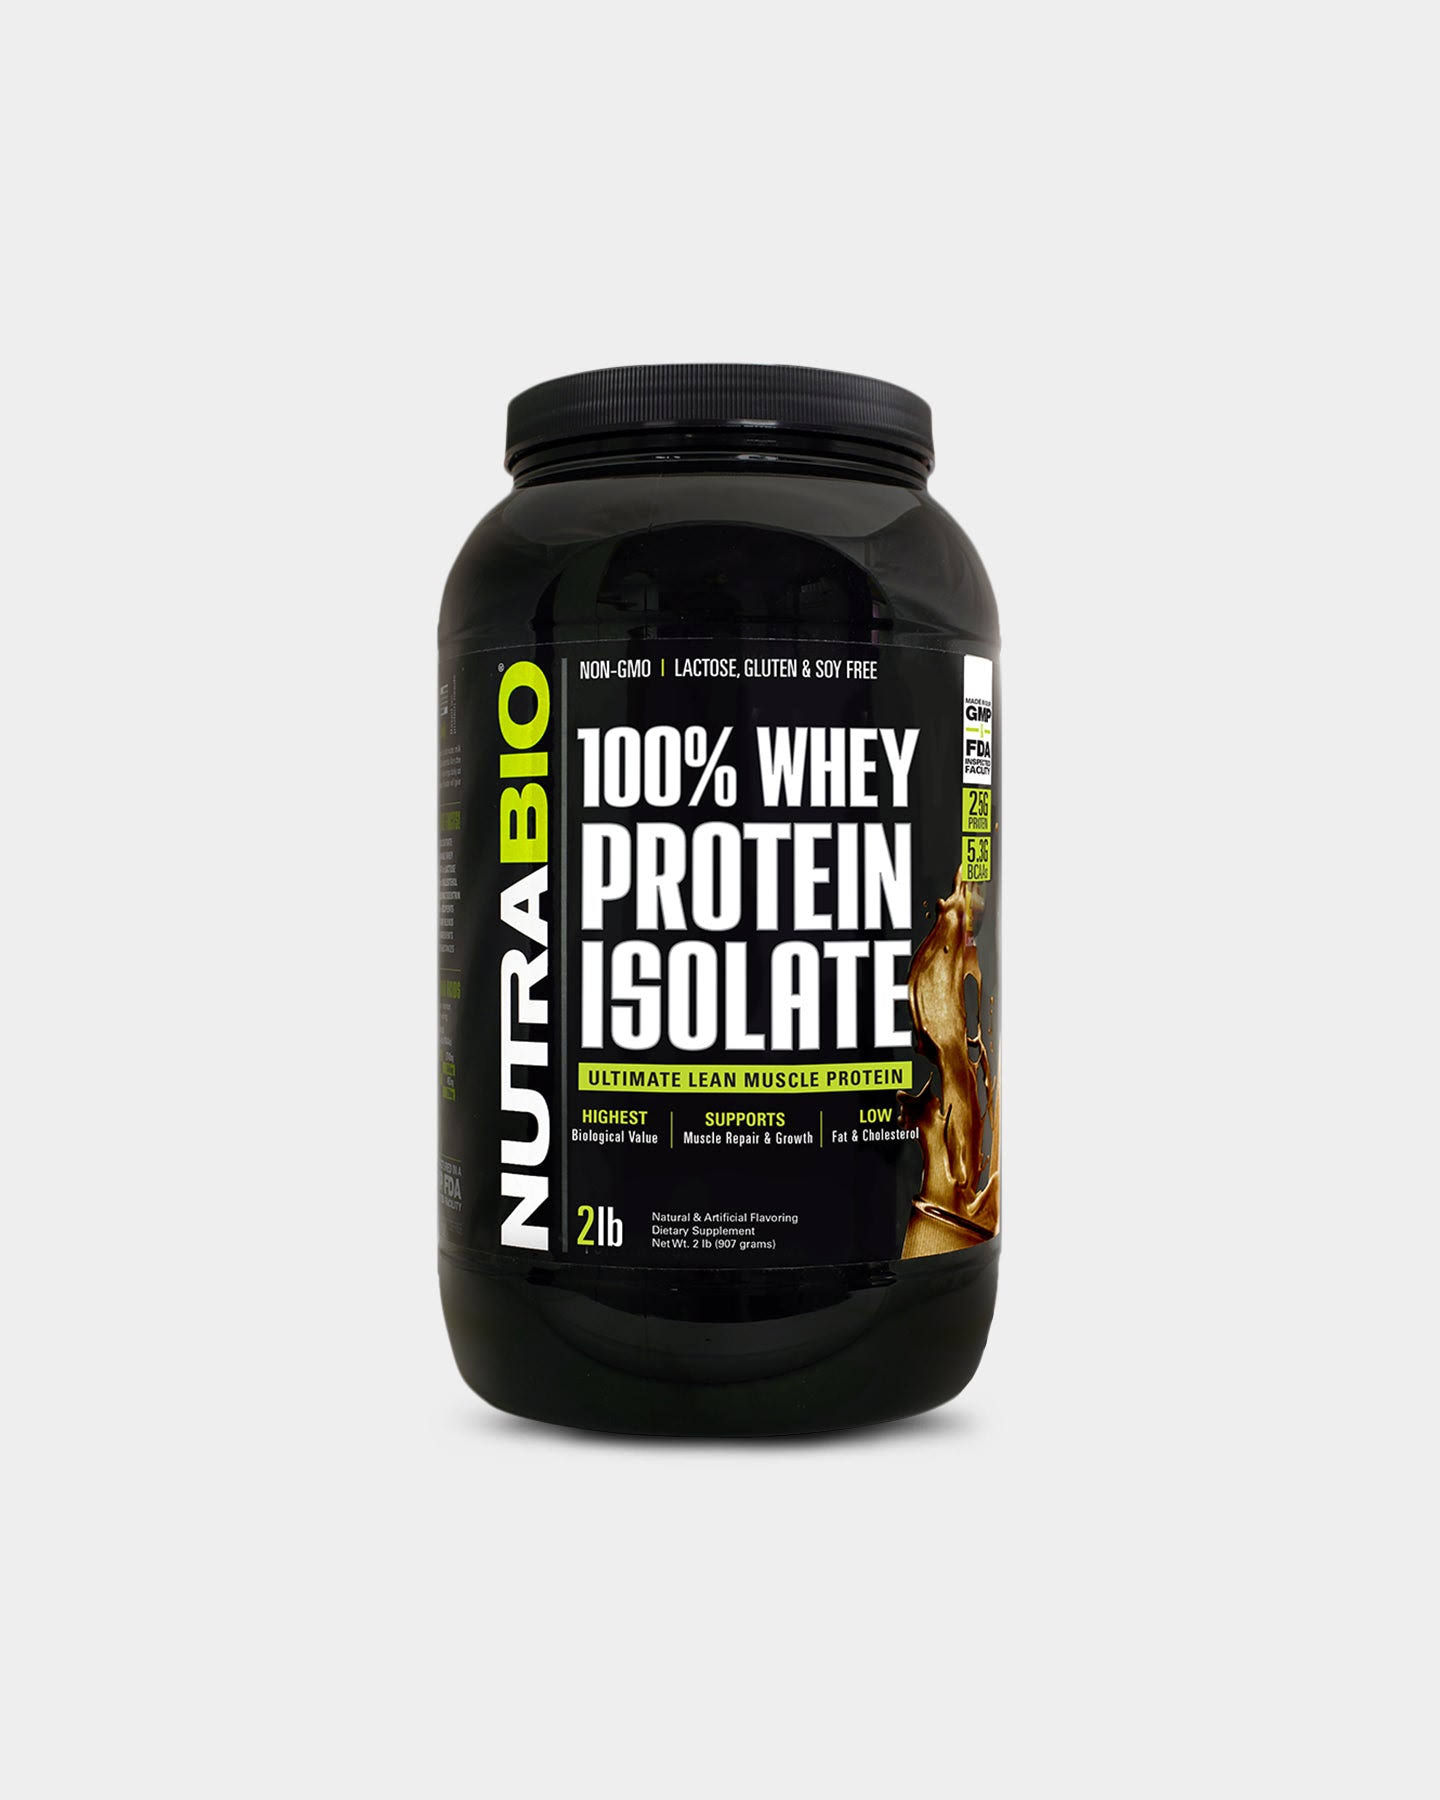 NutraBio 100% Whey Protein Isolate Supplement - 2lbs, Dutch Chocolate